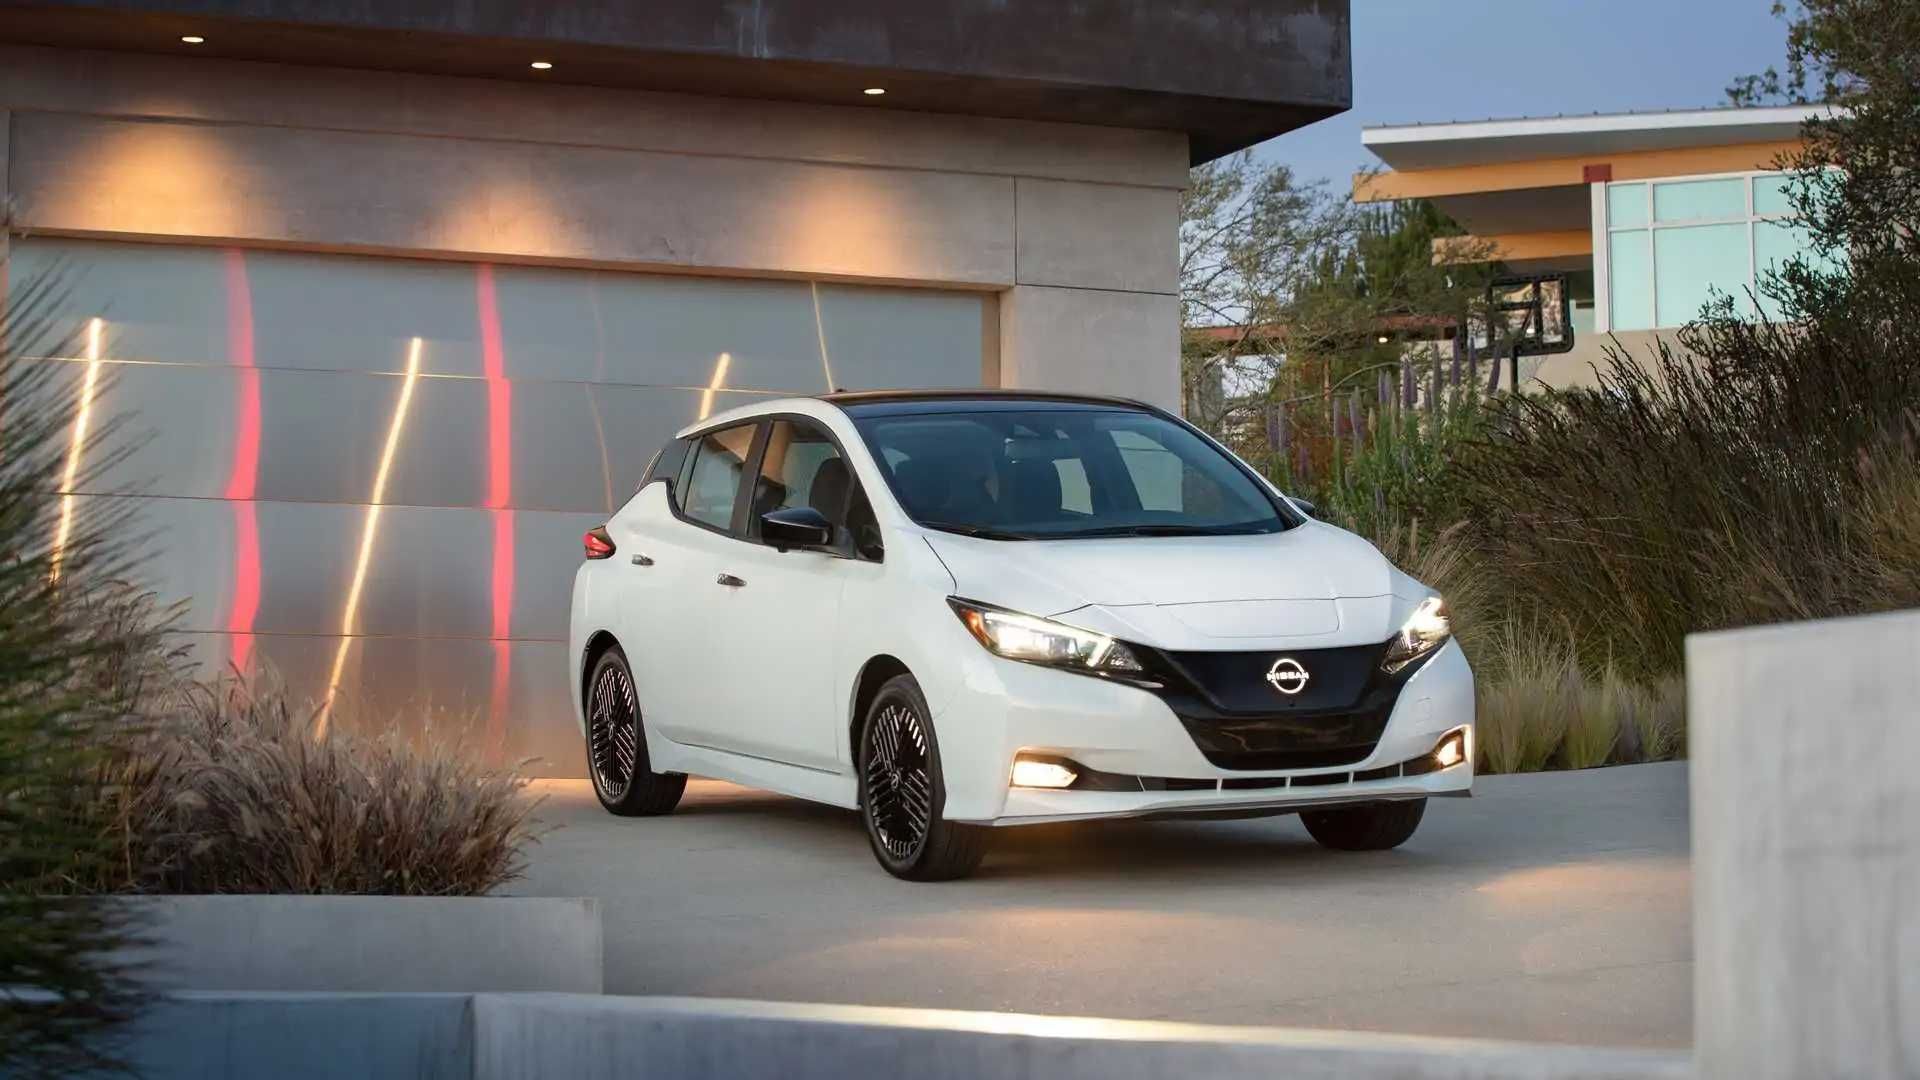 2019-nissan-leaf-plus-review-more-range-for-a-price-carfax